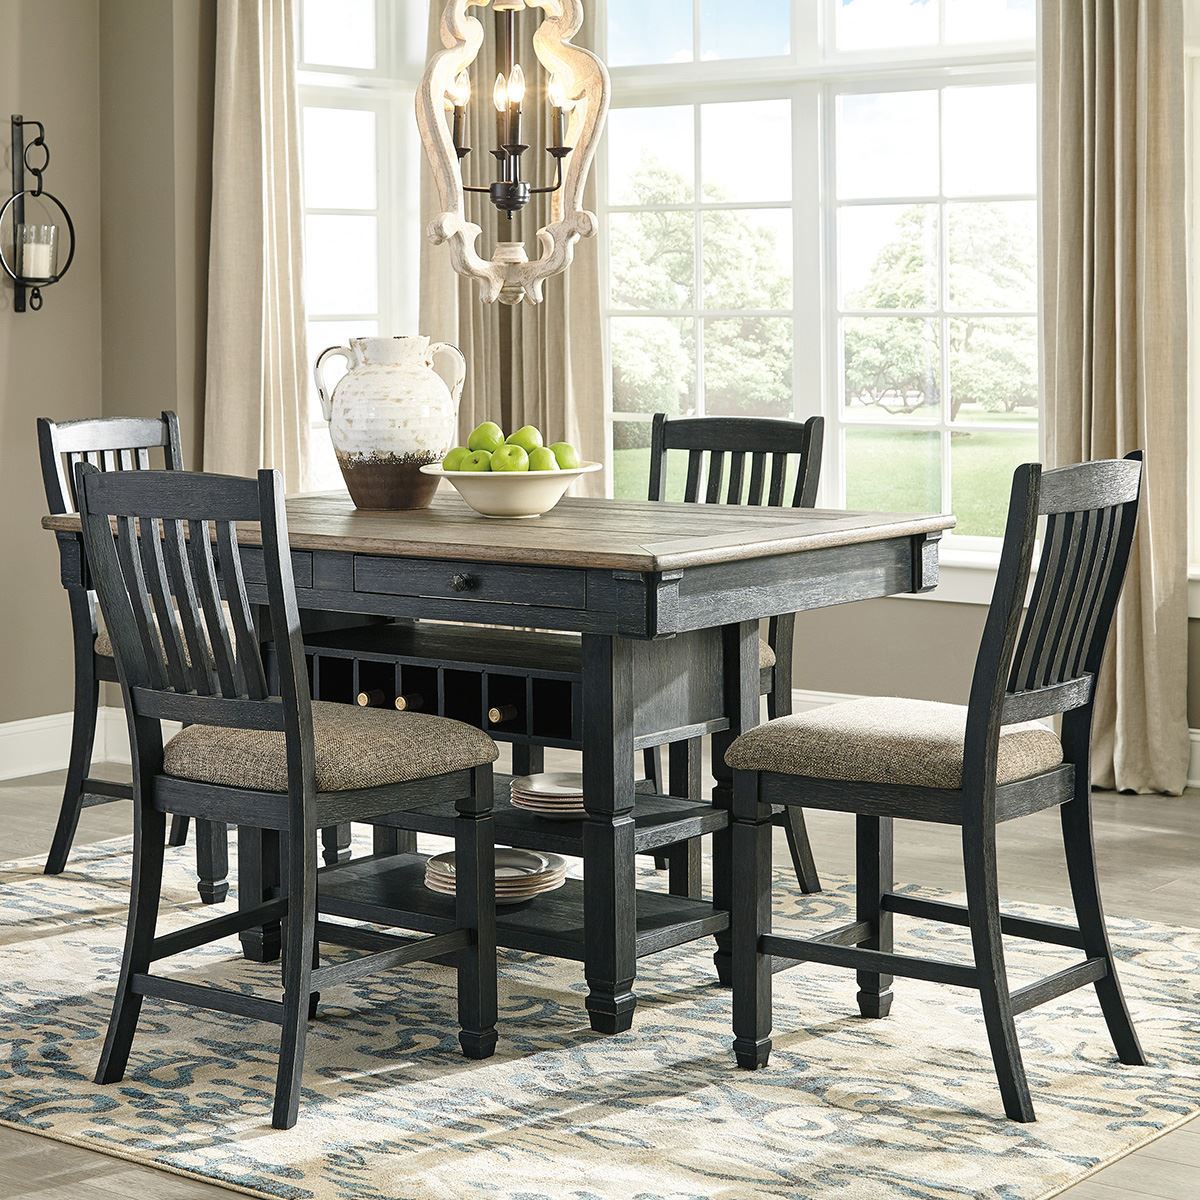 Antiquity Gray 5 Piece Hightop Dining Set | Lifestyle Furniture by